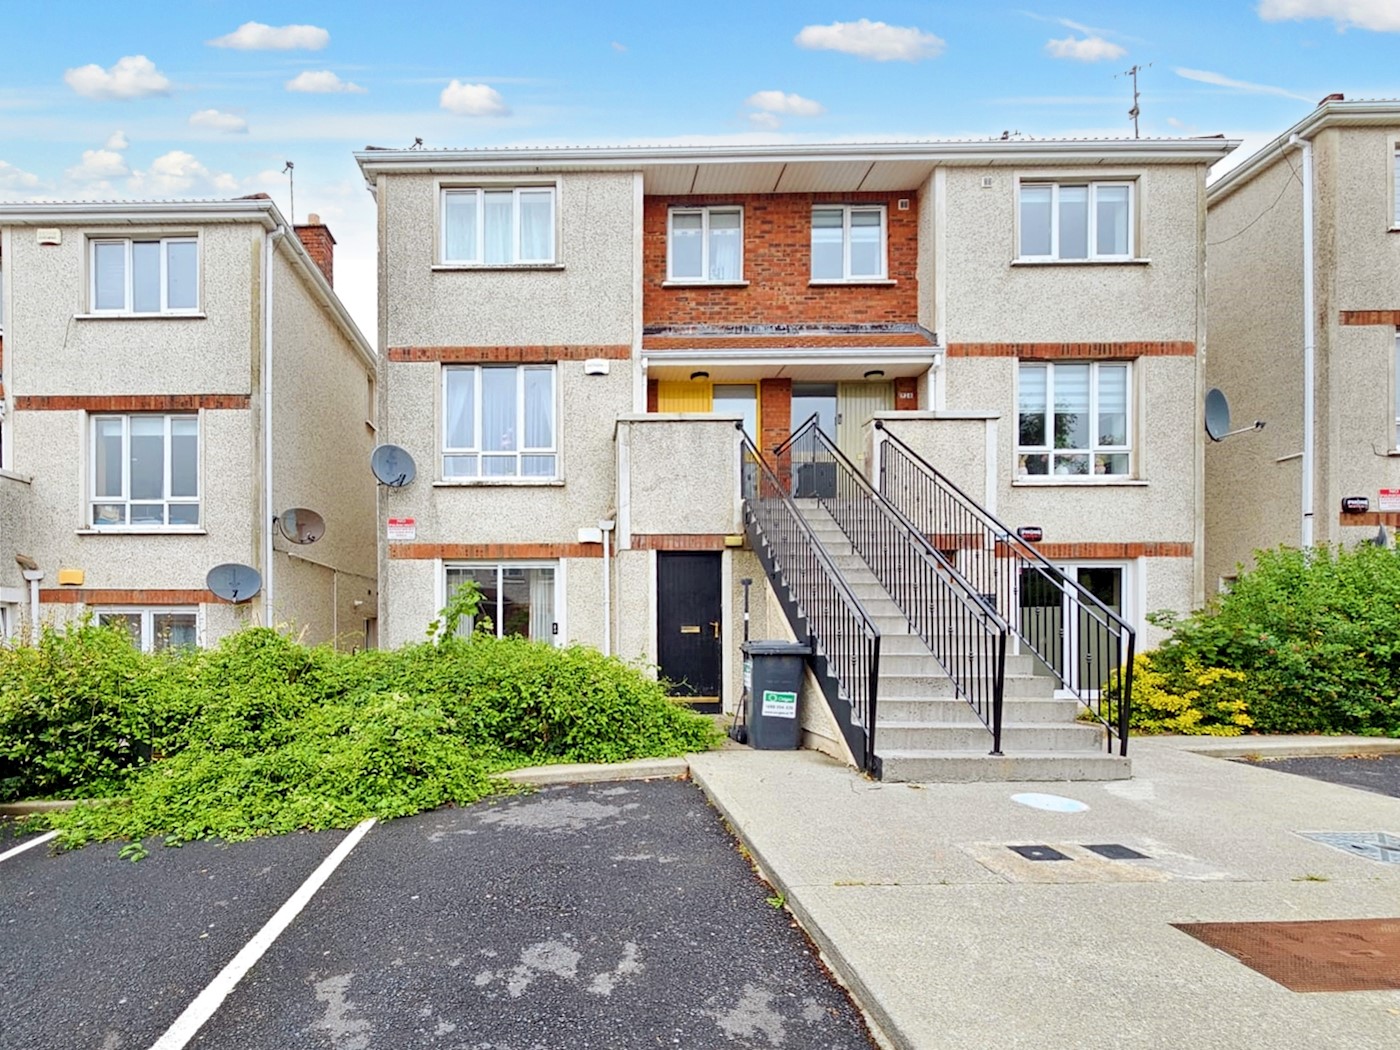 19 The Square, Riverbank, Drogheda, Co. Louth, A92 C426 1/6